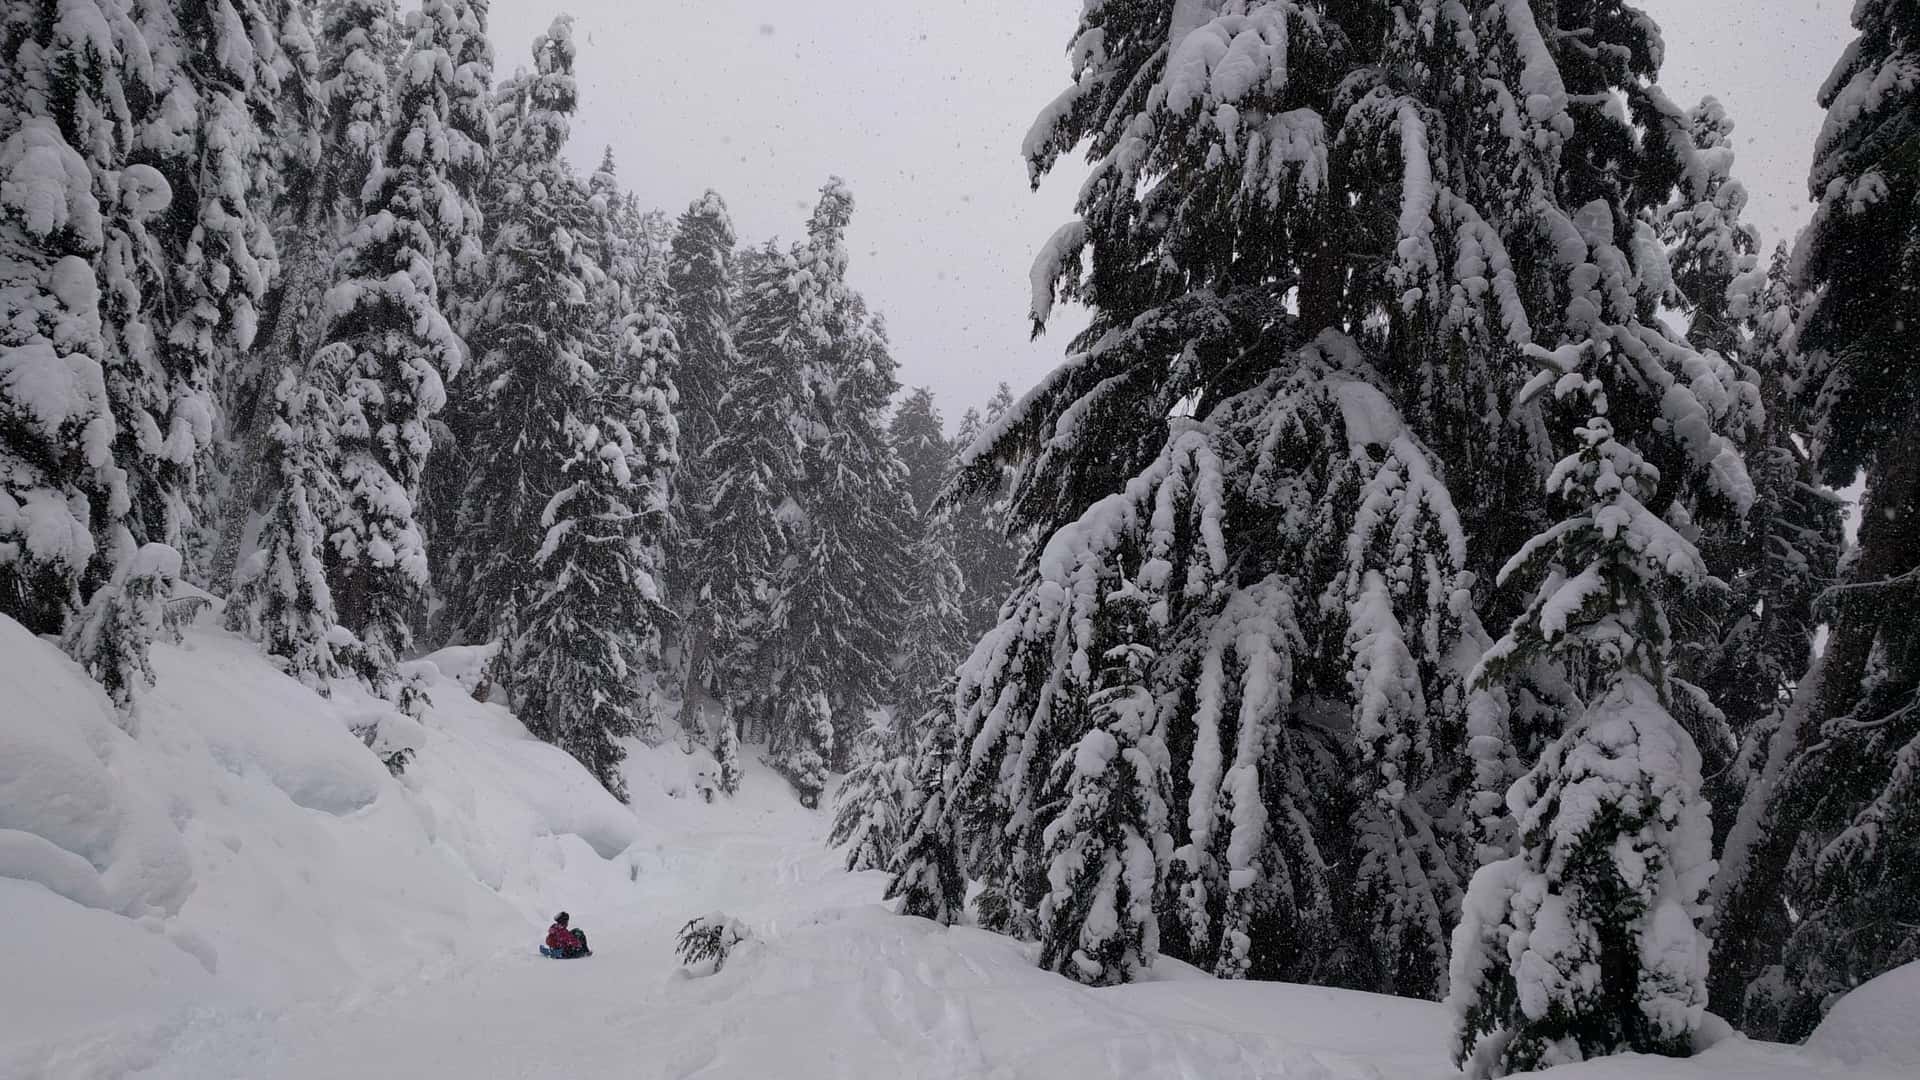 sledding down the Elfin Lakes trail on a roll-up sled